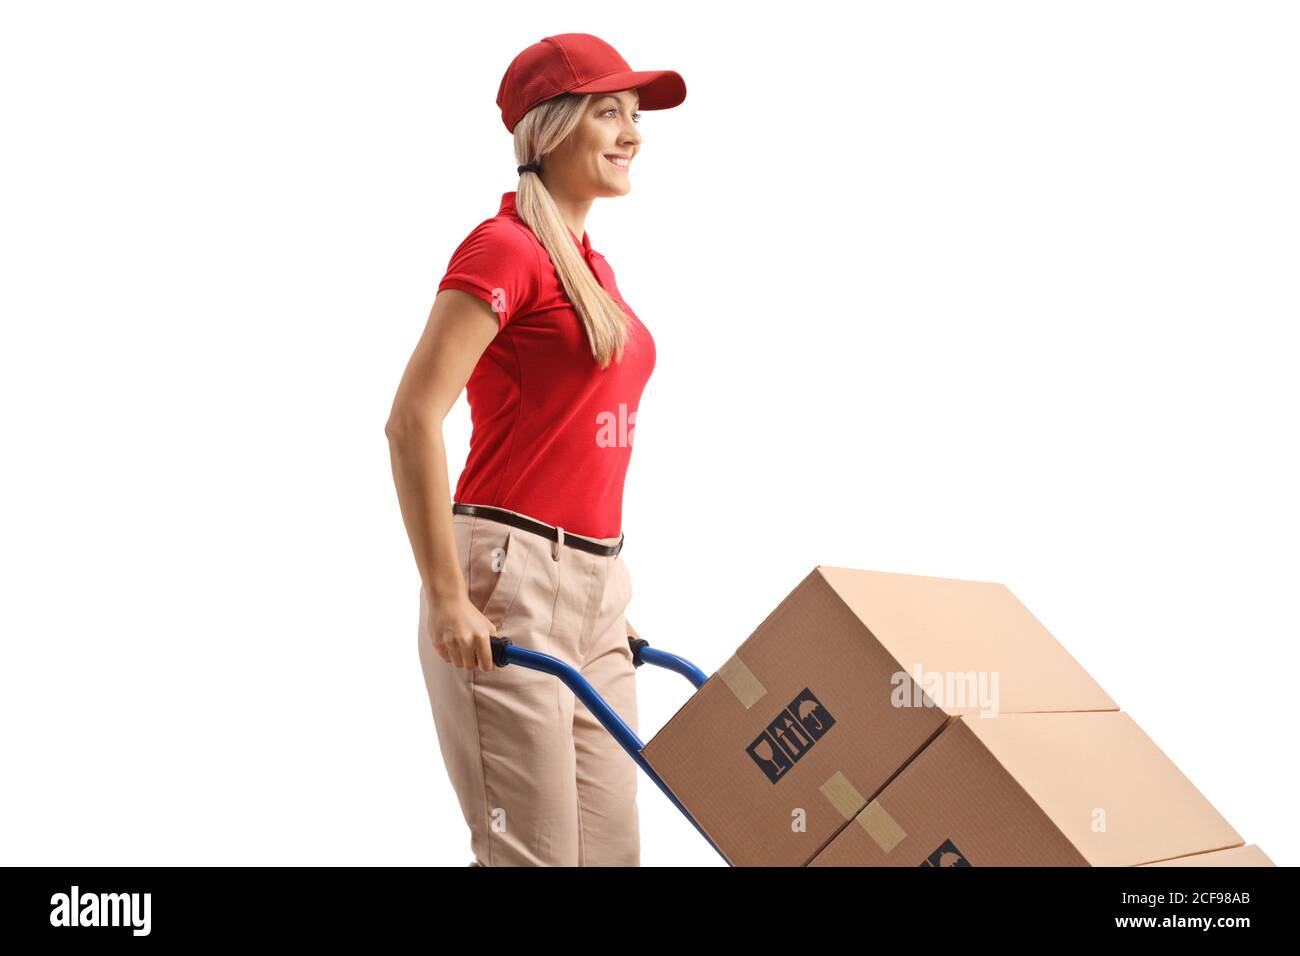 Woman worker pushing boxes on a hand truck isolated on white background Stock Photo